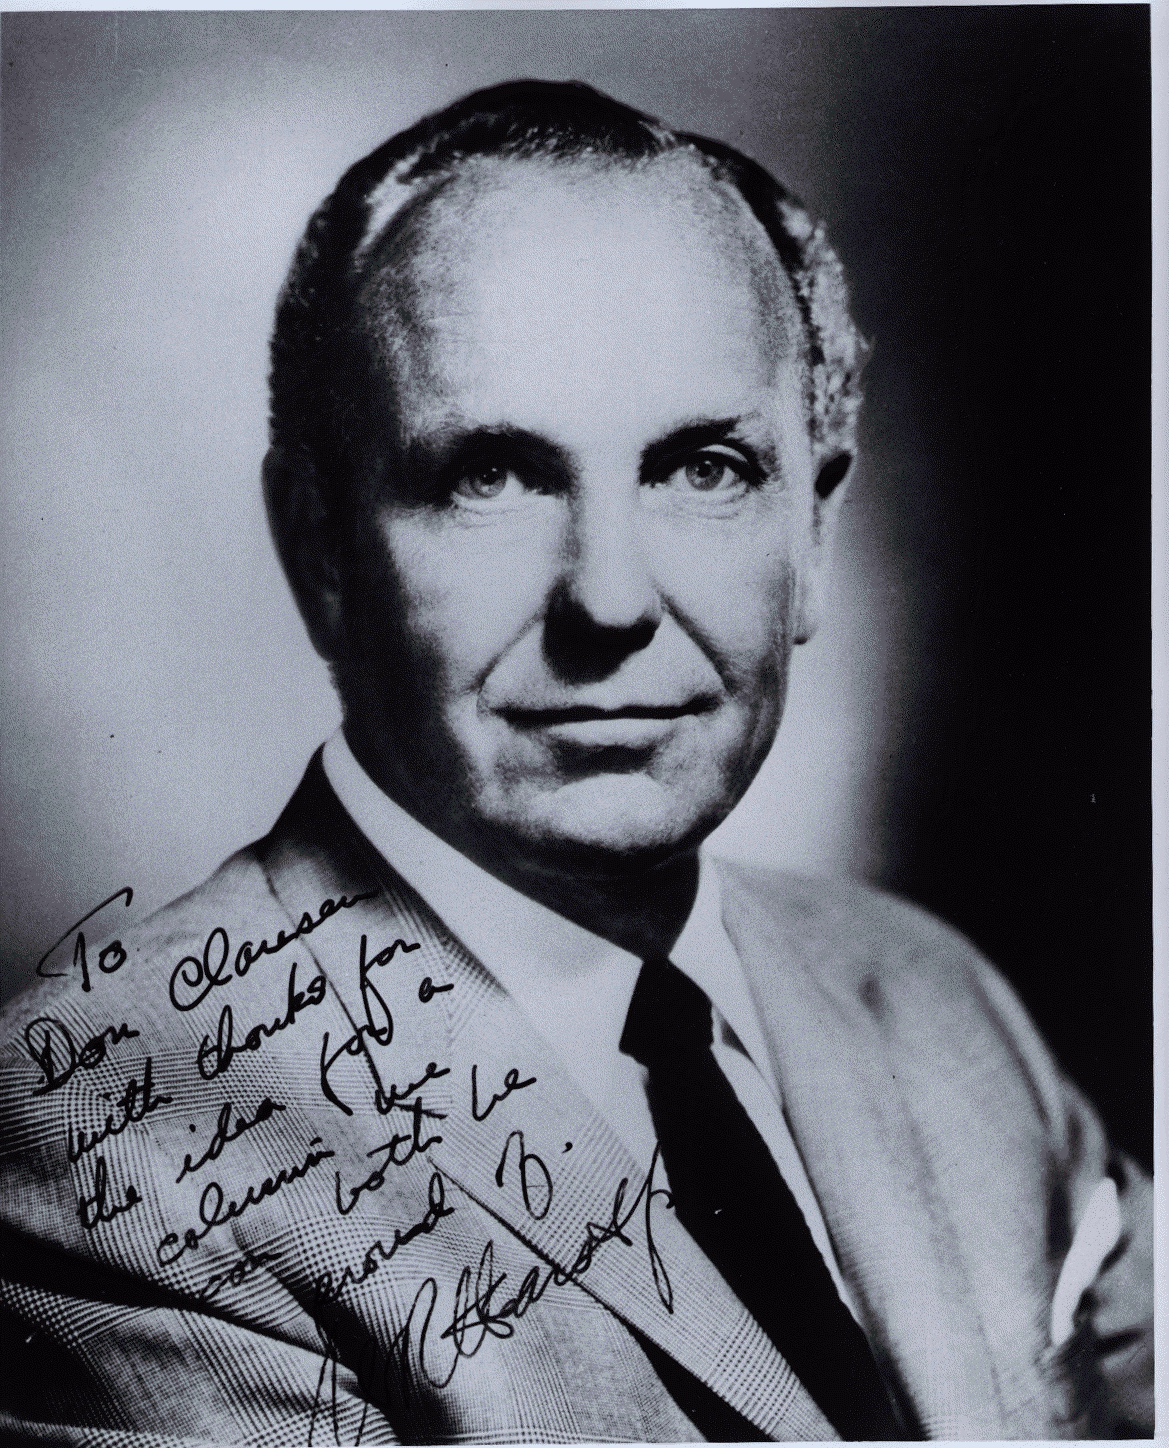 Autographed photo from William Randolph Hearst